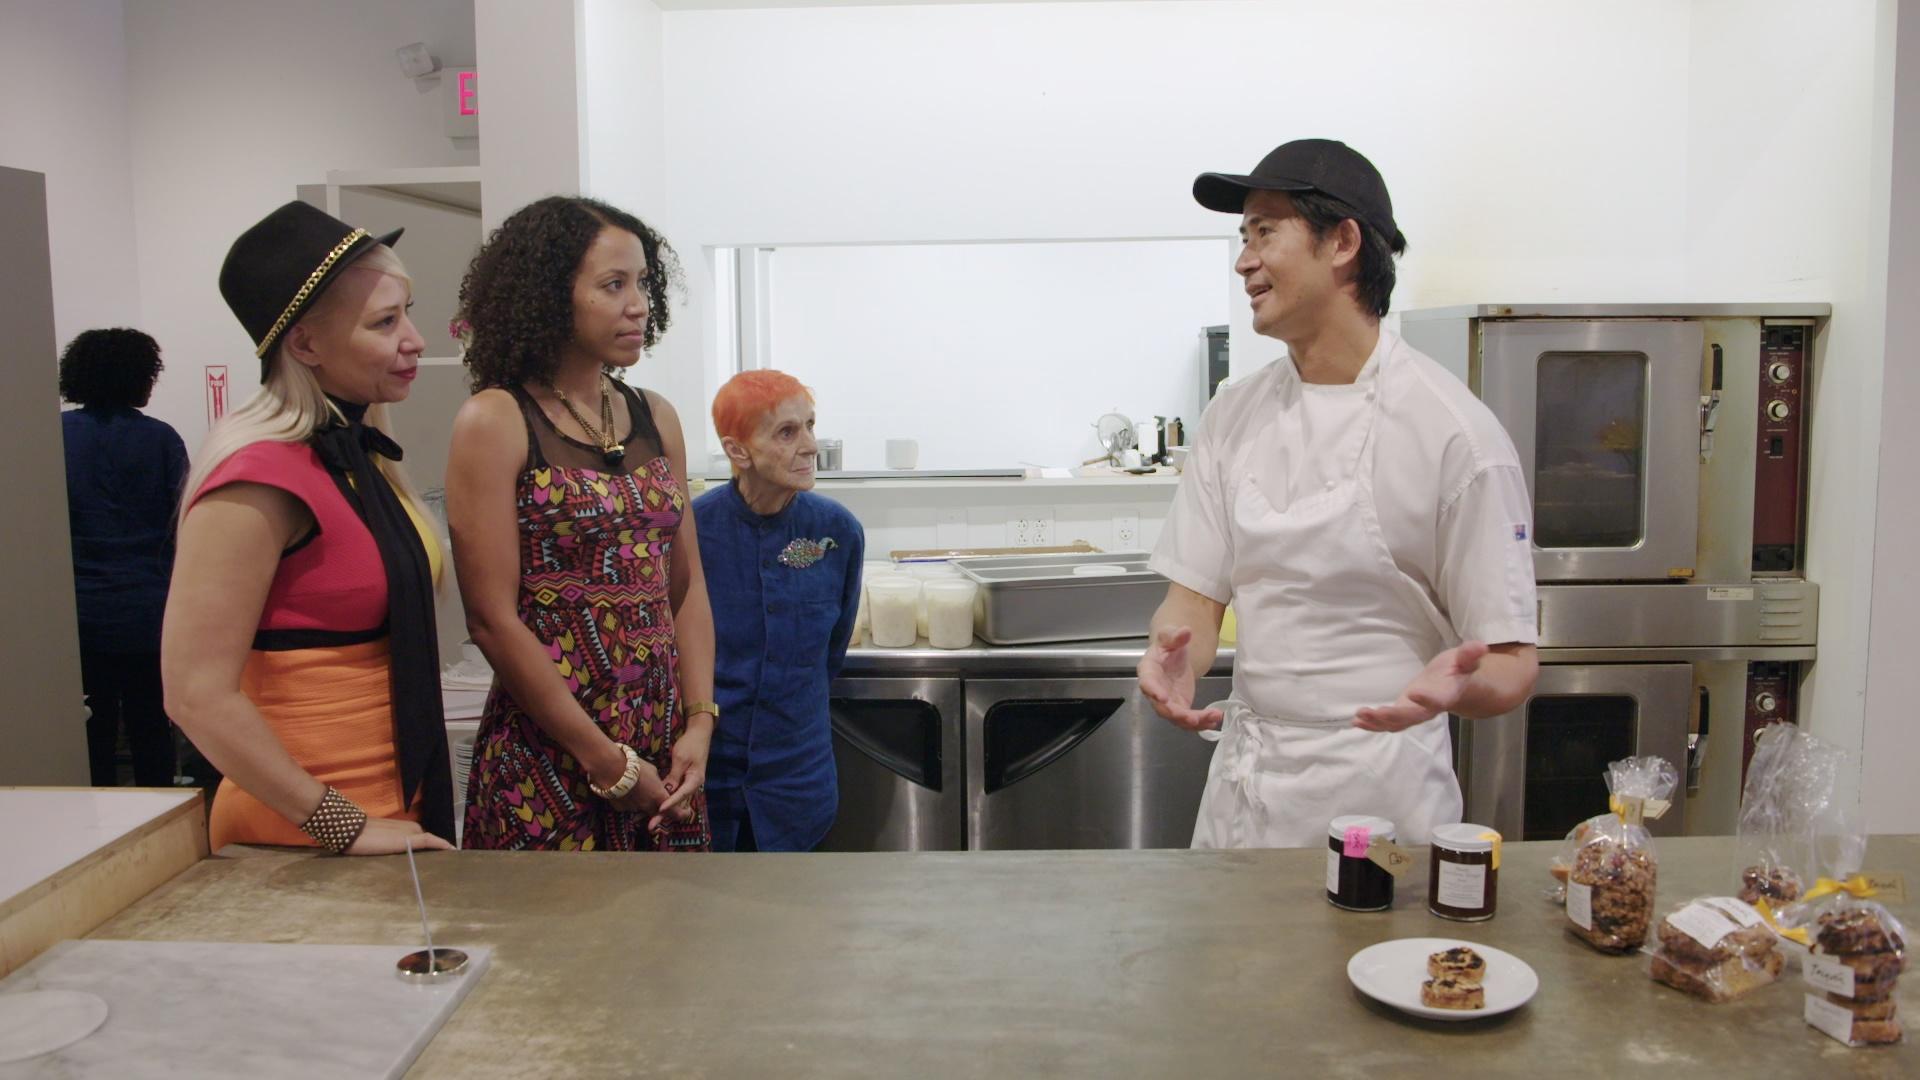 Carol and L’Oréal visit the kitchen at FRIEDA, a local Philadelphia cafe that aims to bring generations together.